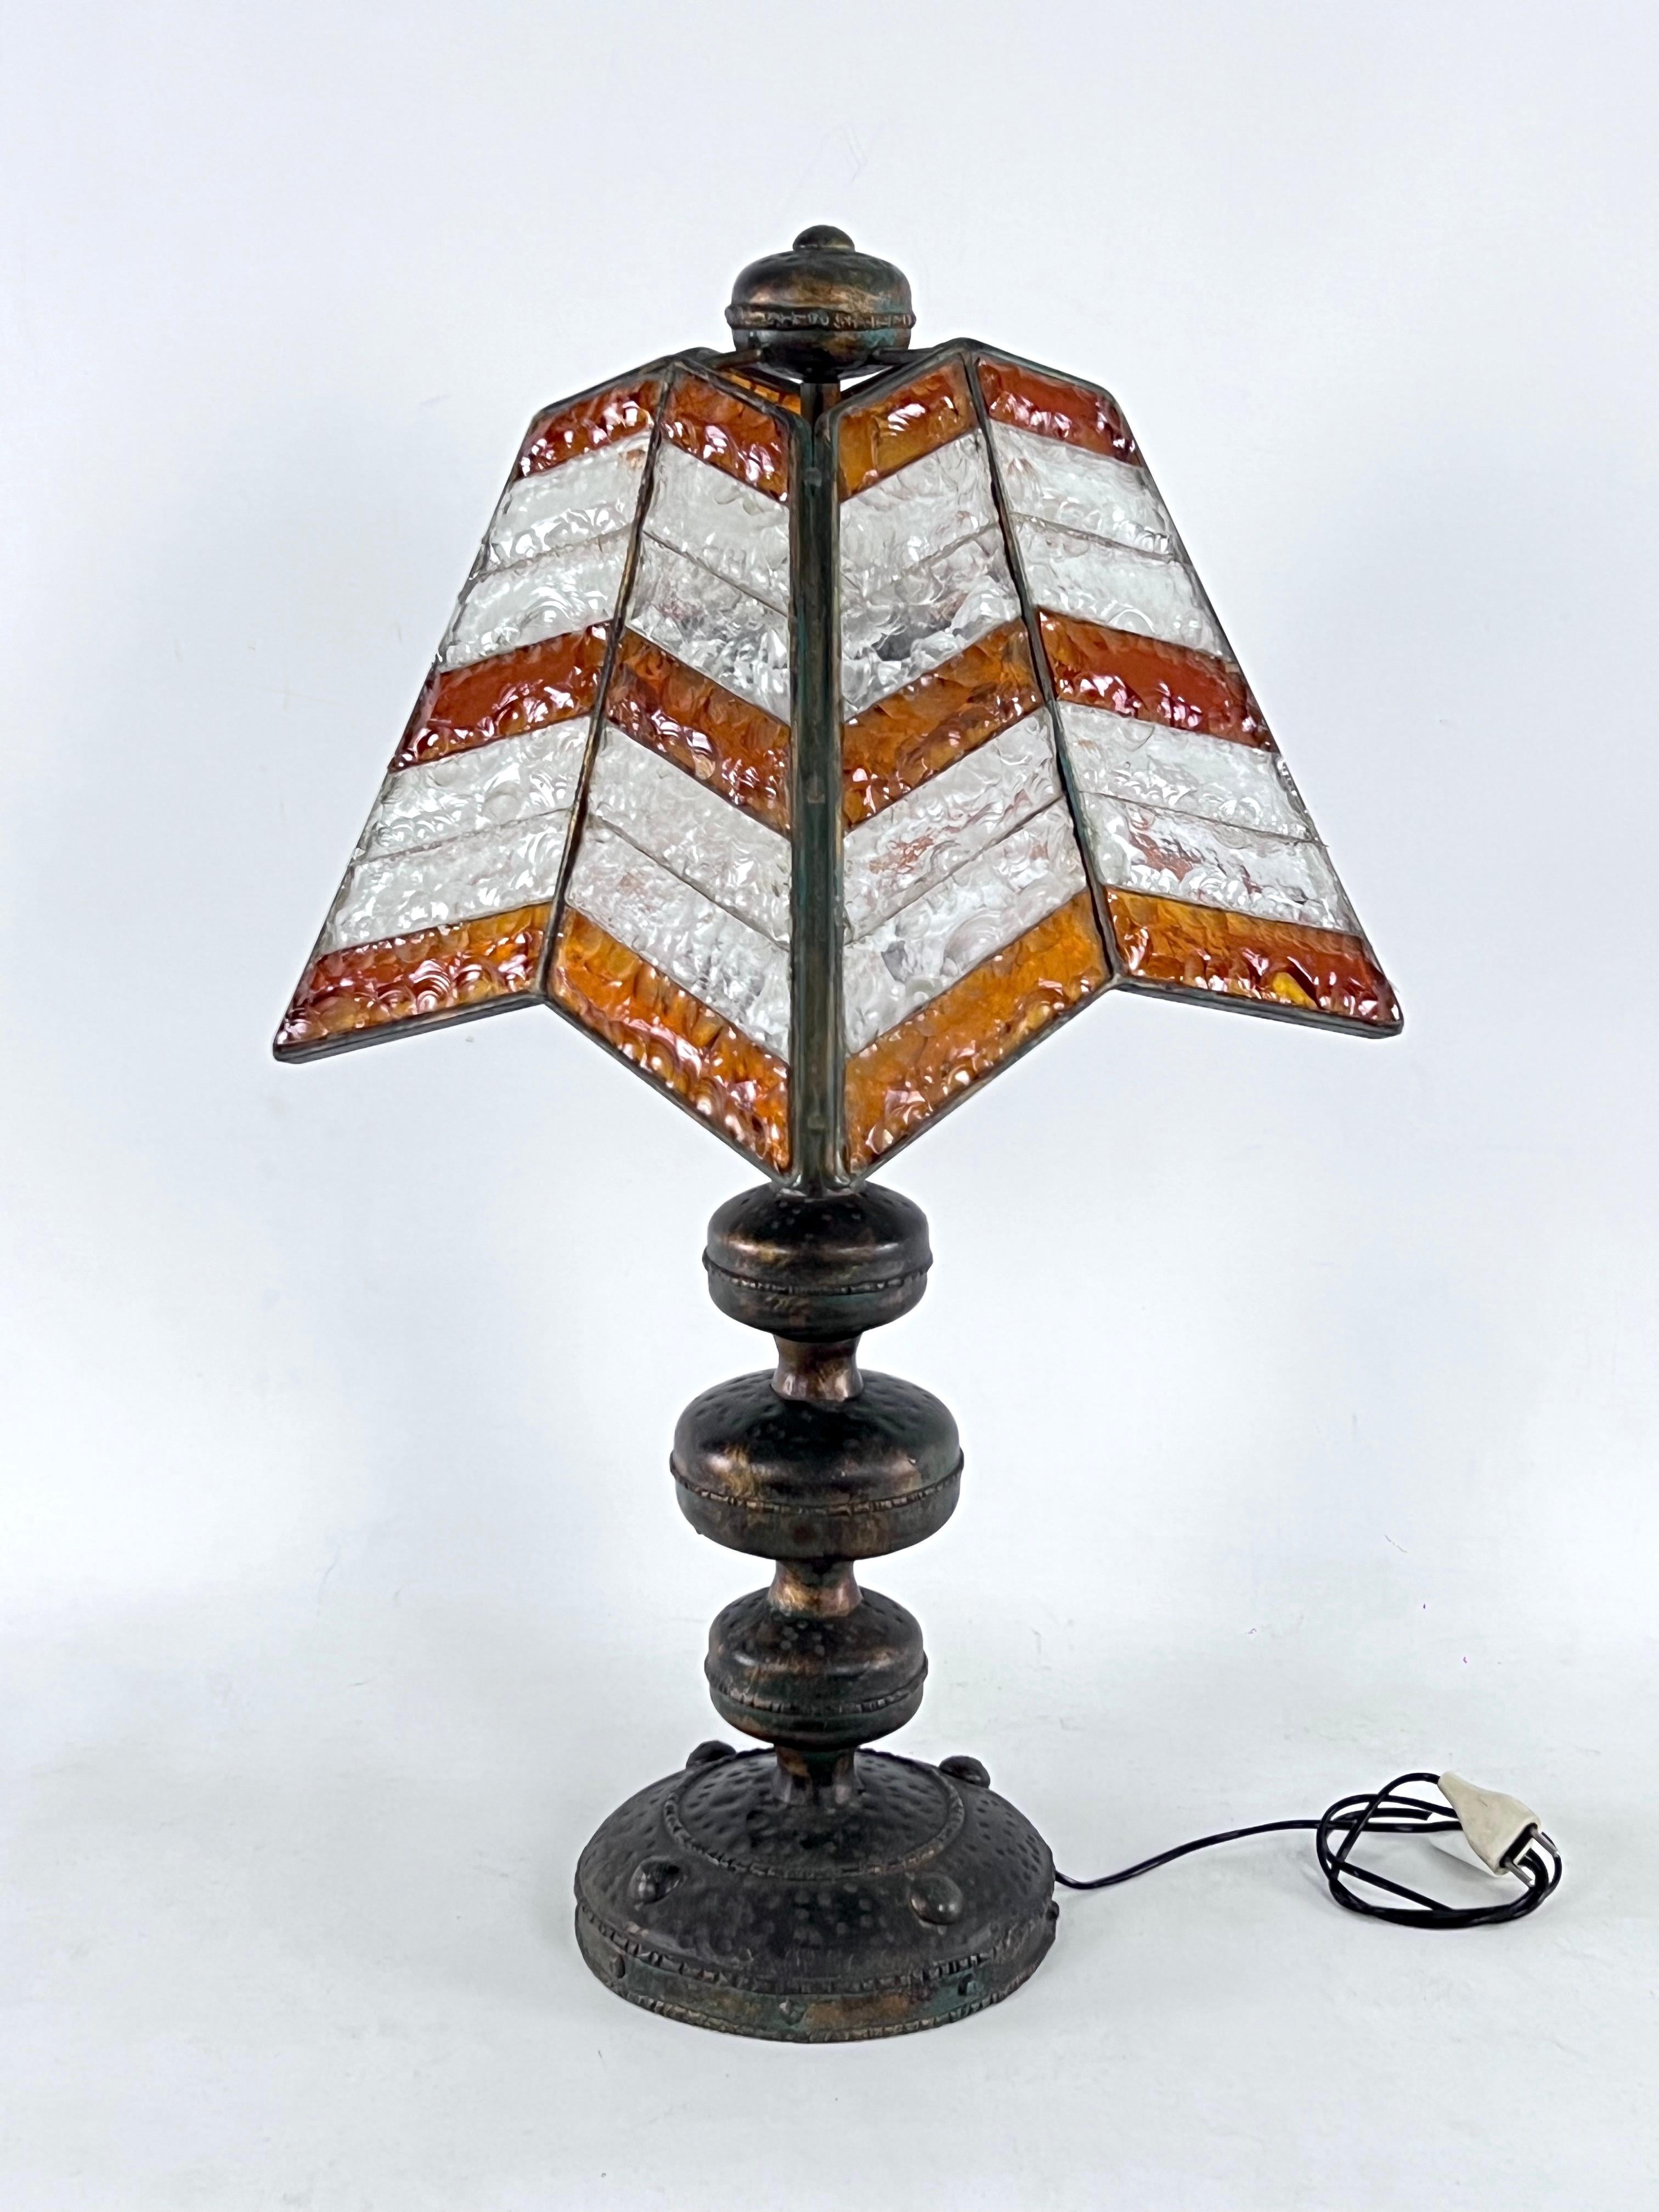 Great vintage condition with normale trace of age and use for this table lamp produced by Longobard and made from thick cut glass and metal in brutalist style.  Full working with EU standard, adaptable on demand for USA standard.